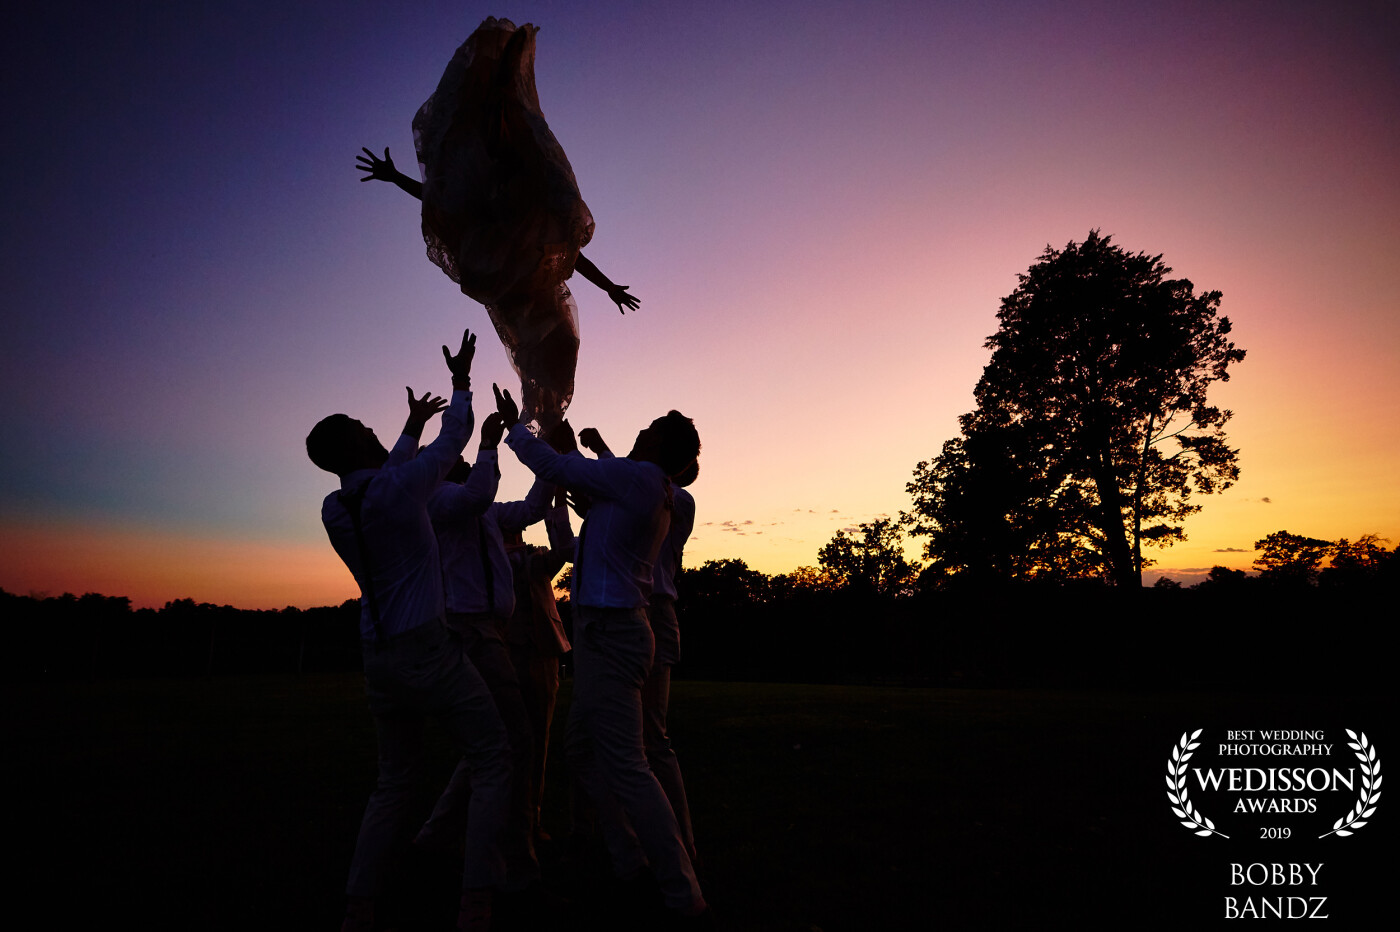 The groom wanted an epic toss in the air from his groomsmen to celebrate his marriage so what did we do....we threw him in the air! To my astonishment the bride felt left out and wanted to do the same so what did we do...well we threw her in the air at sunset and wow what a shot! I don't think she was ready for it by her arms flailing in the air but she sure had a blast and loved the final photo! What a priceless memory she will never forget!